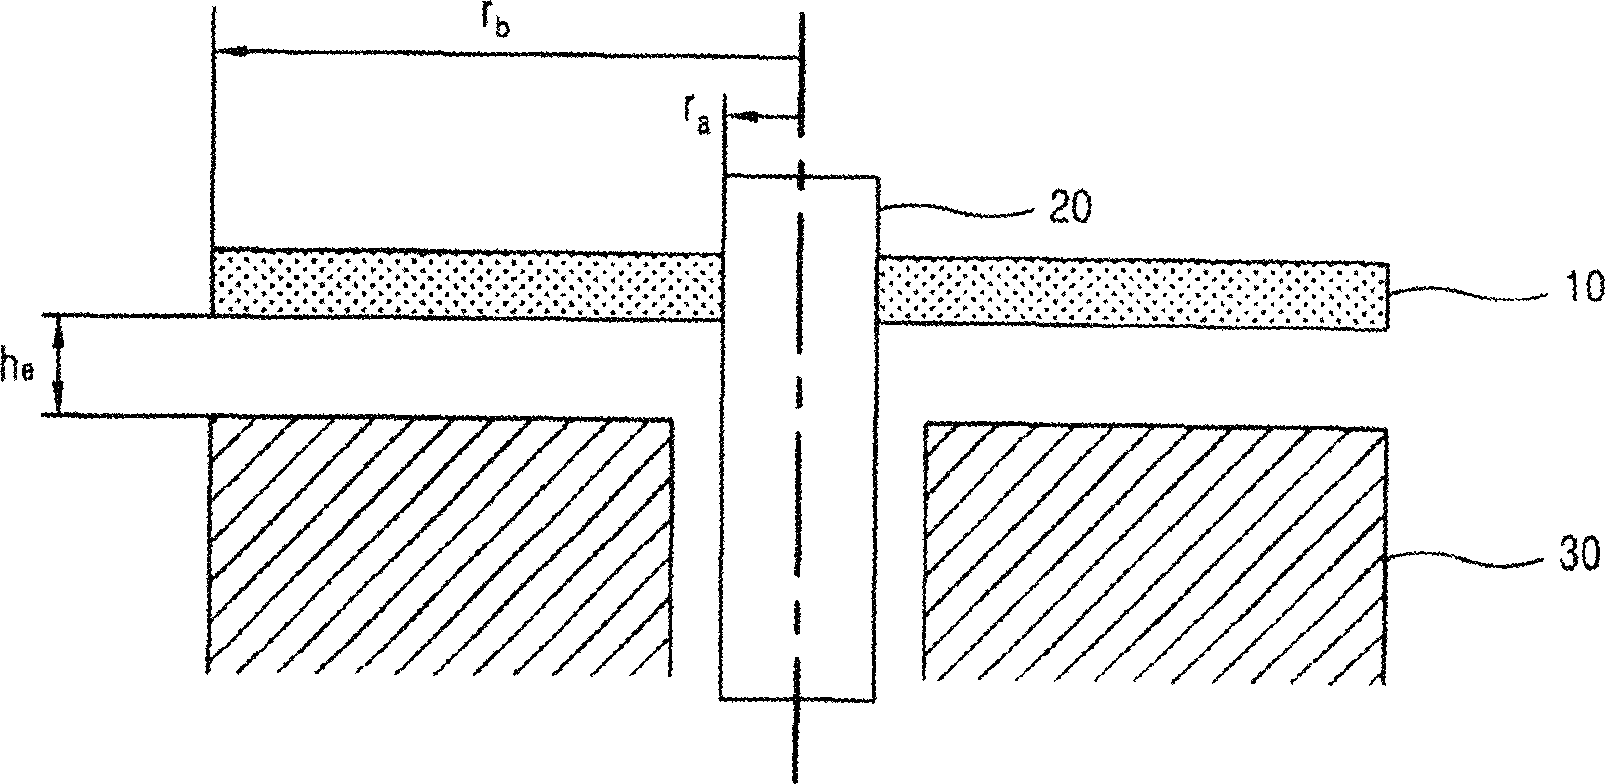 Optical disk driver with novel structure